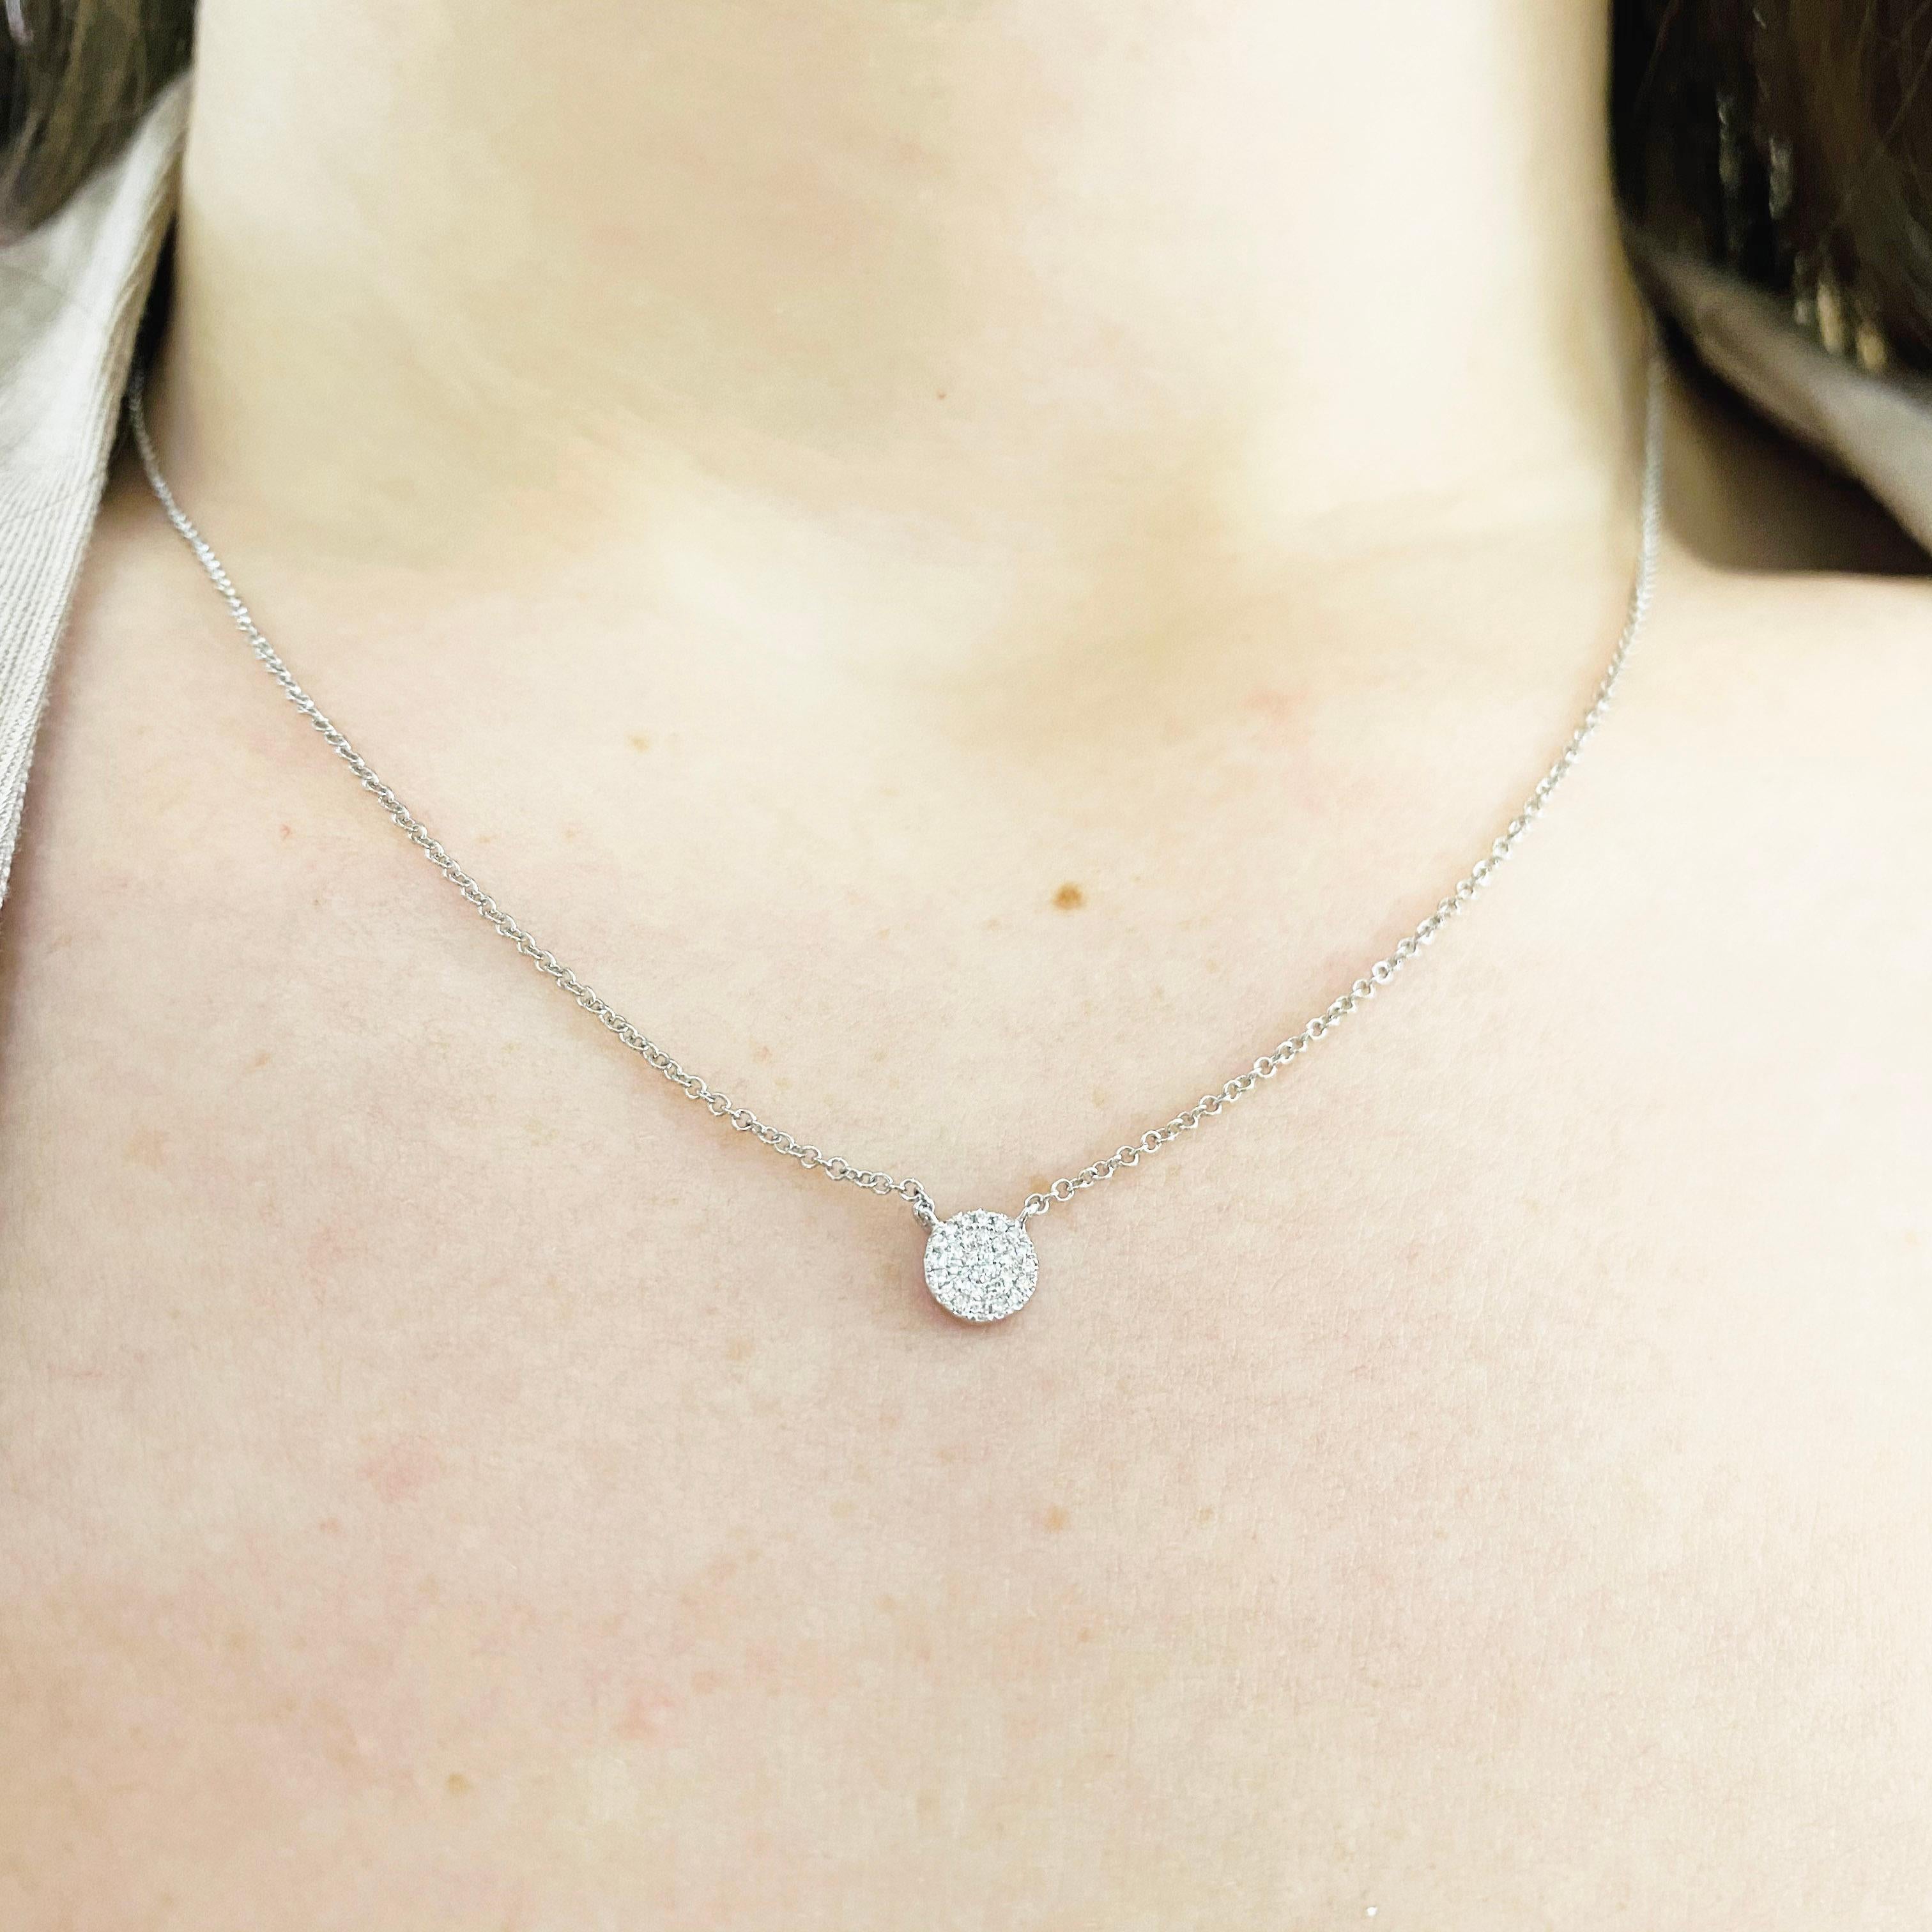 This gorgeous 14k white gold disk pendant with pave diamonds is sure to put a smile on anyone's face! This necklace looks beautiful worn by itself and also looks wonderful in a necklace stack. This necklace would make a wonderful gift for your loved